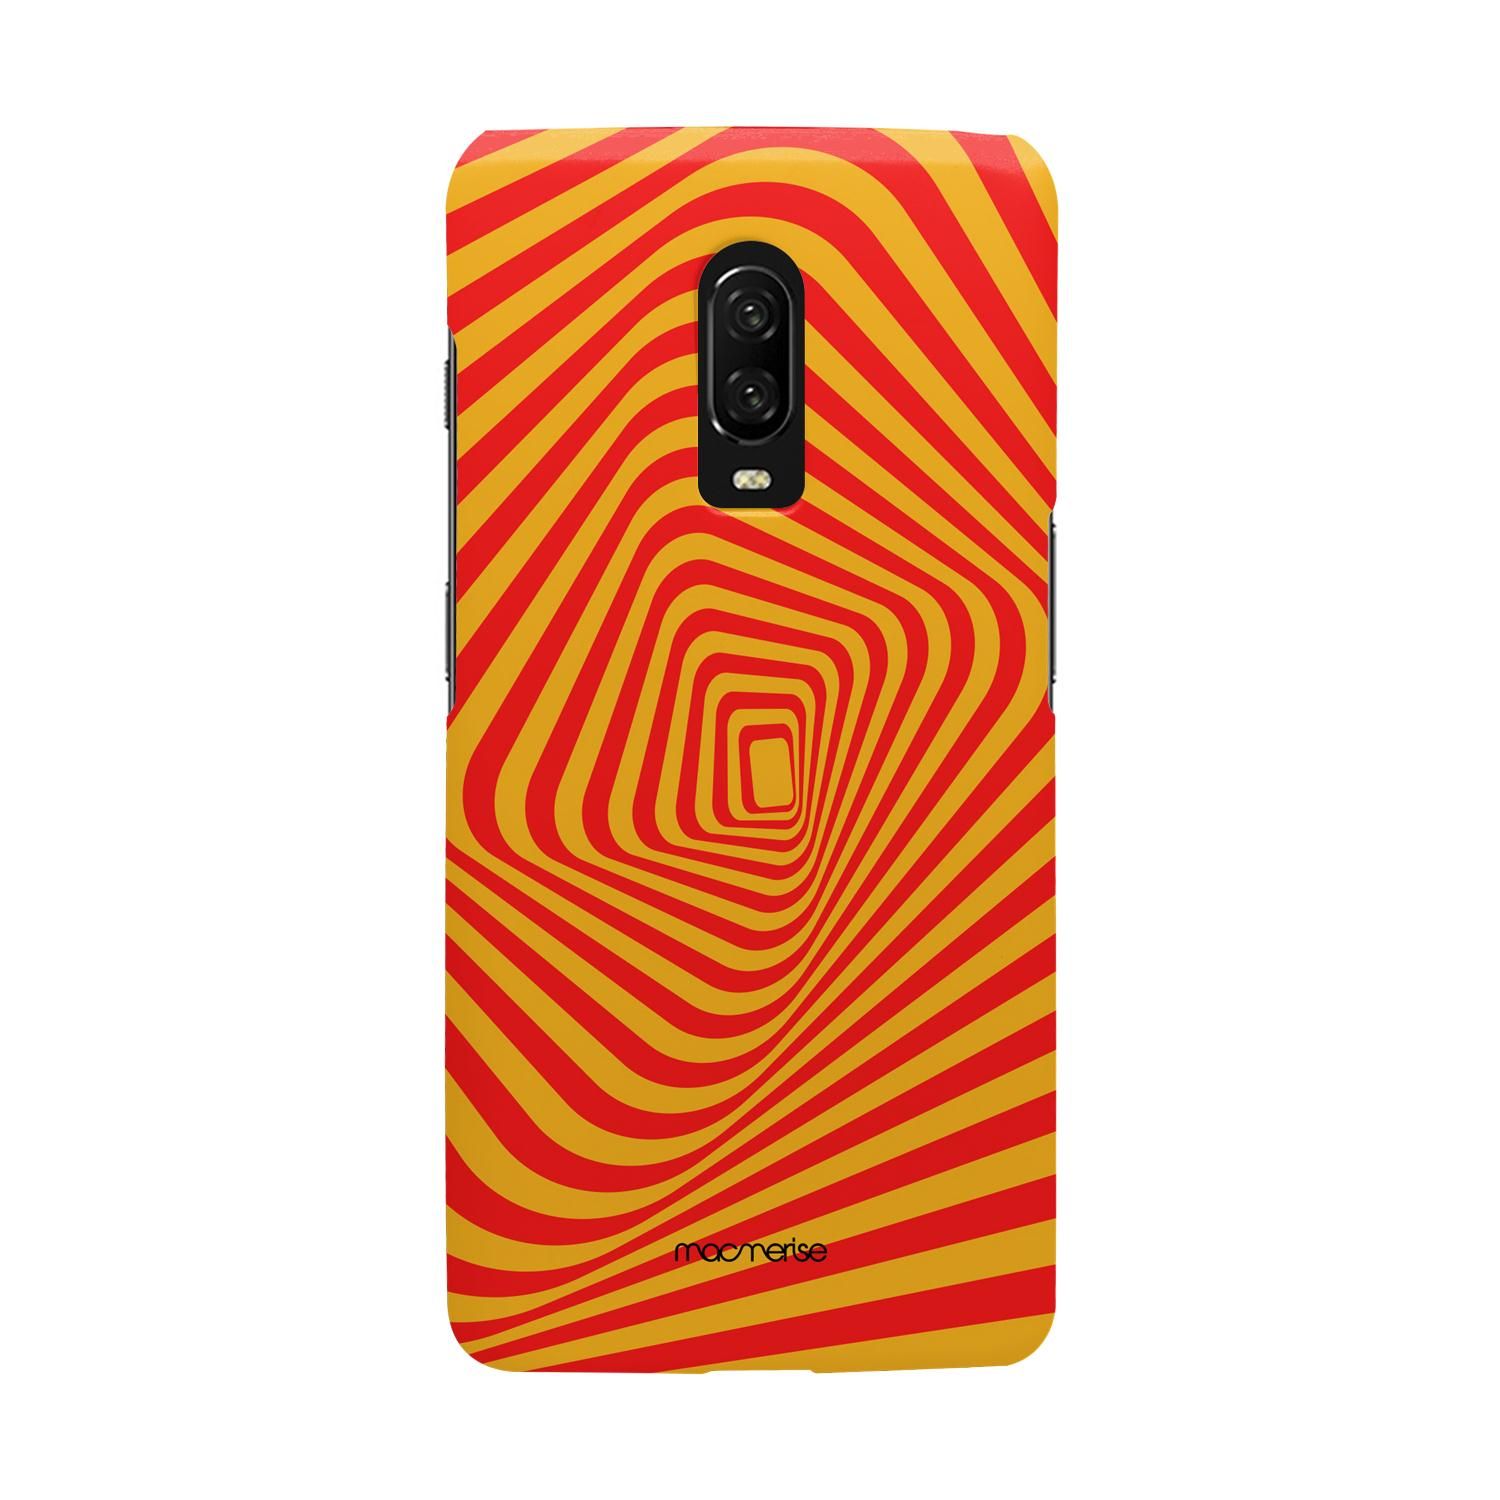 Physiollusion - Sleek Case for OnePlus 6T